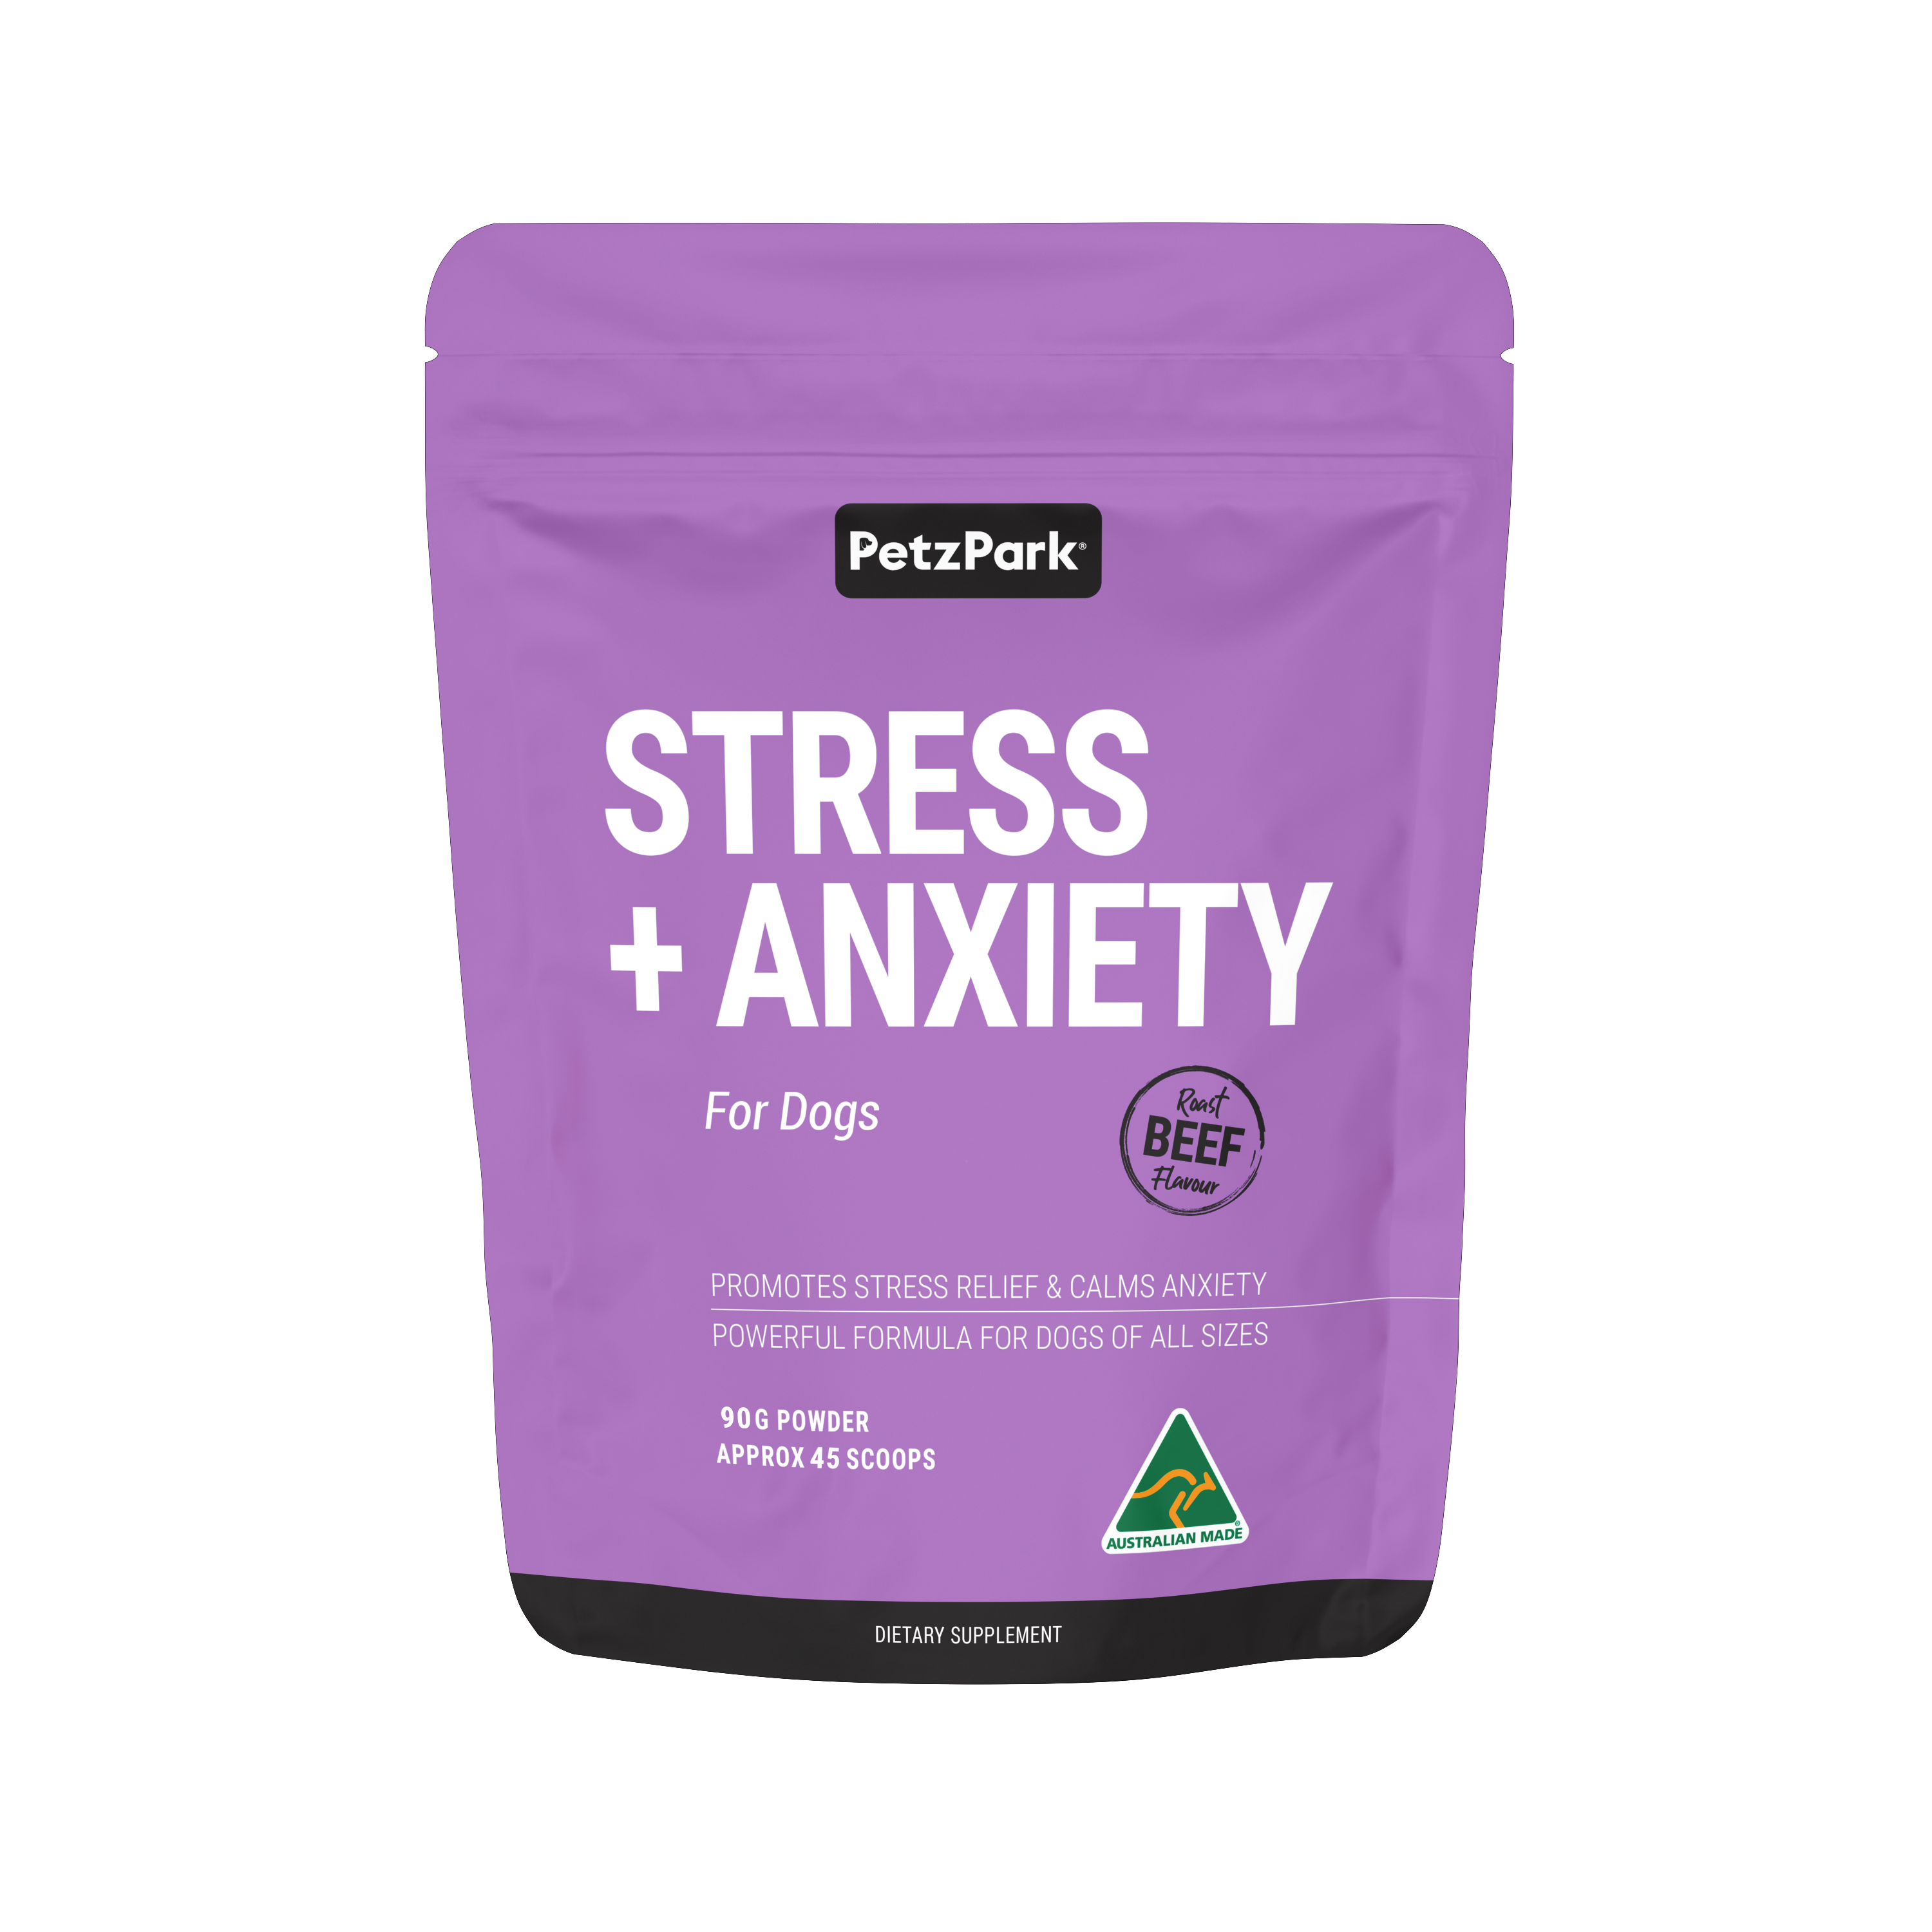 Stress + Anxiety for Dog powder, valerian root, L-tryptophan, somnifera, chamomile for calming anxiety & restful sleep